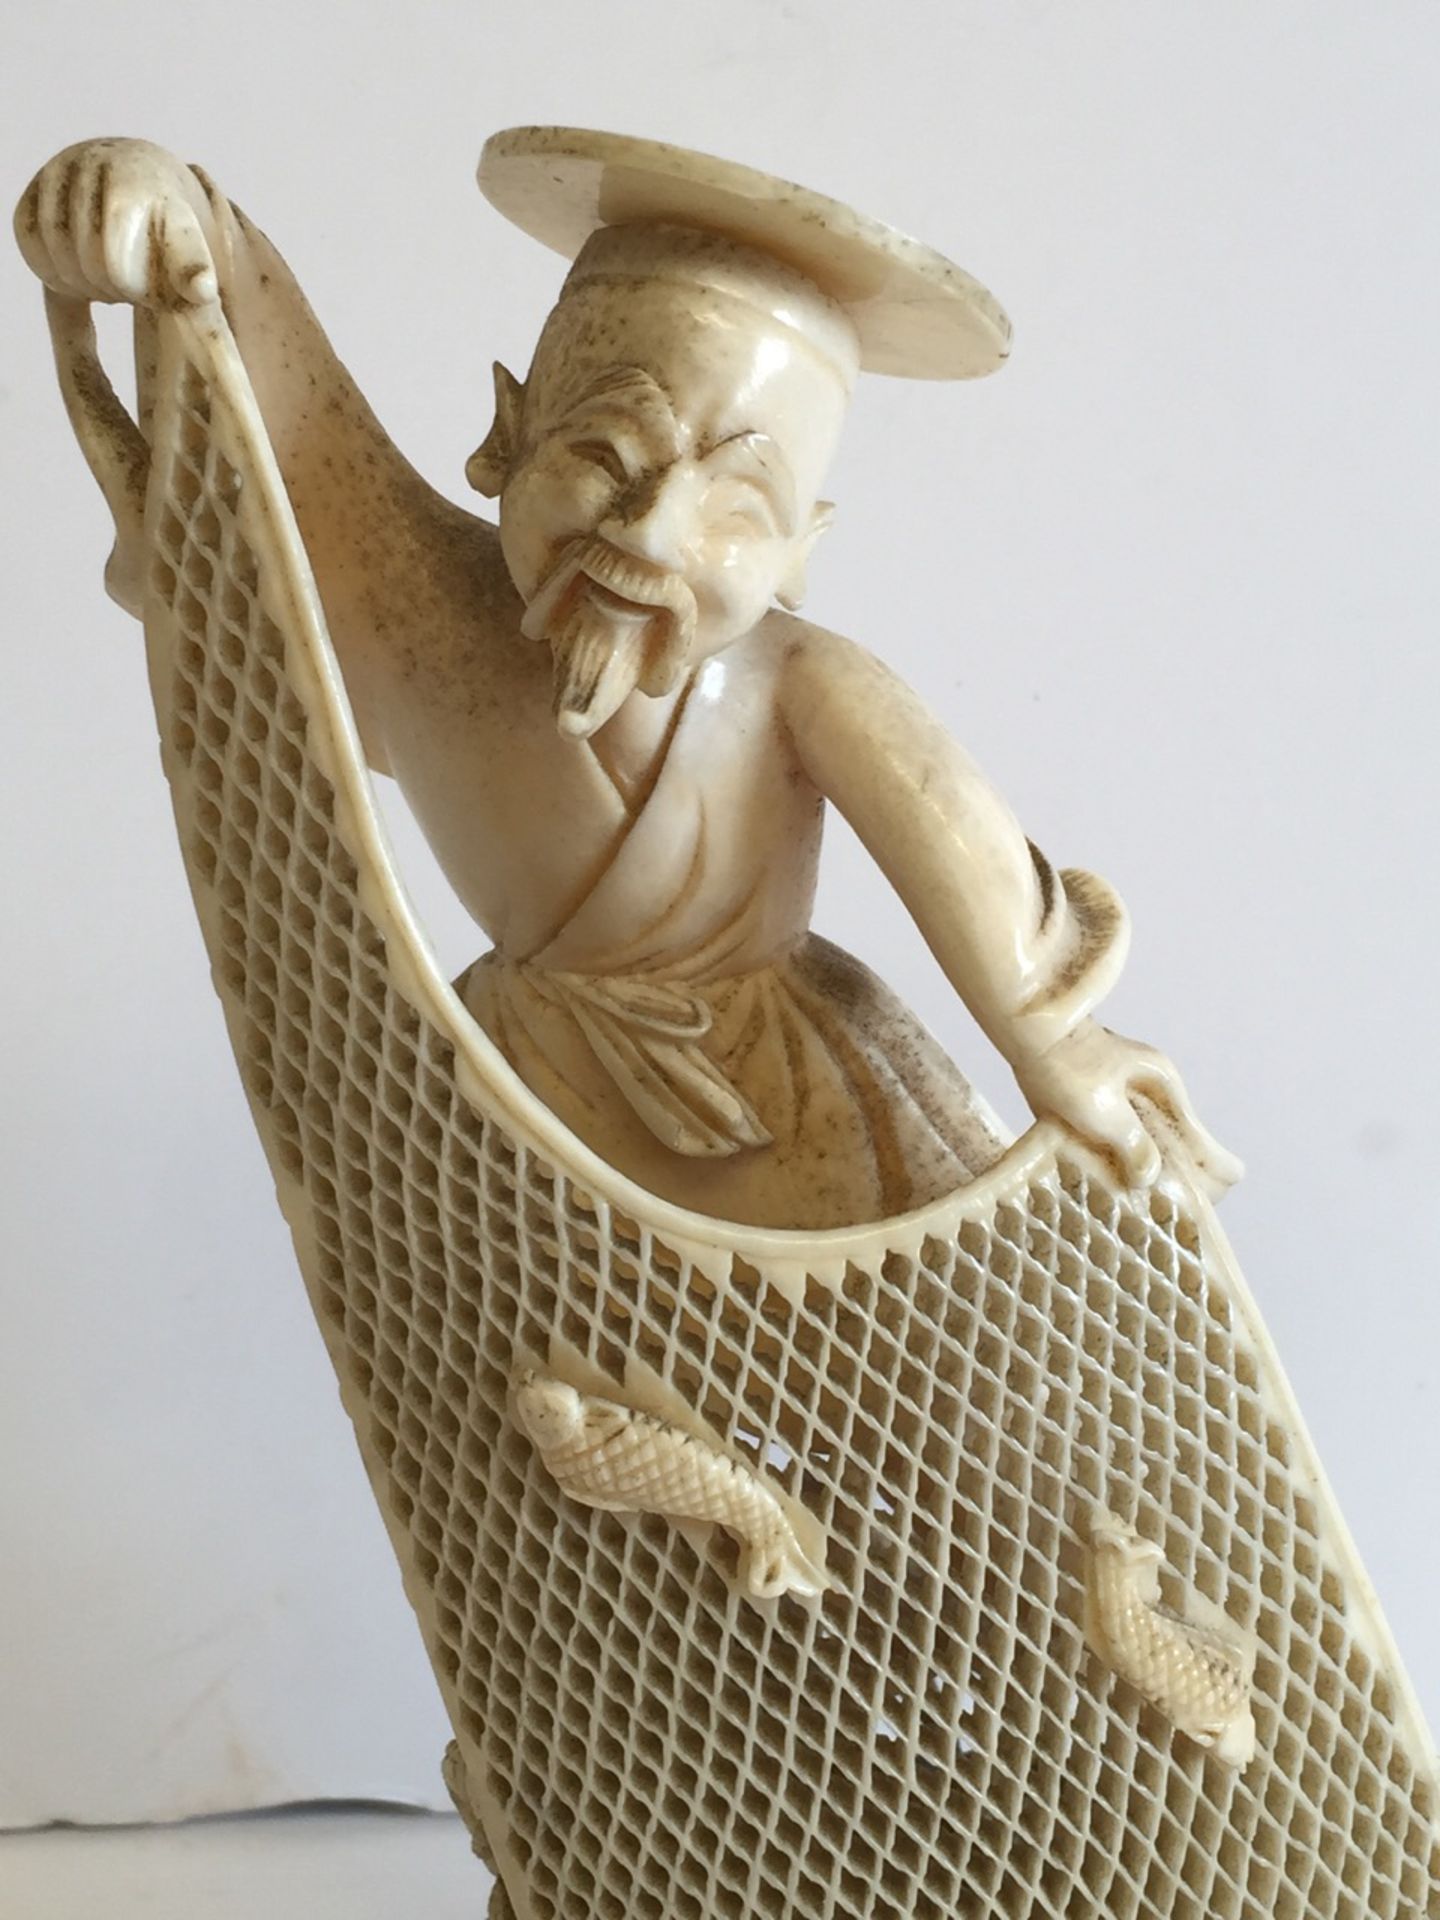 A Meiji Period Japanese Ivory Carving of a Fisherman - Image 2 of 7